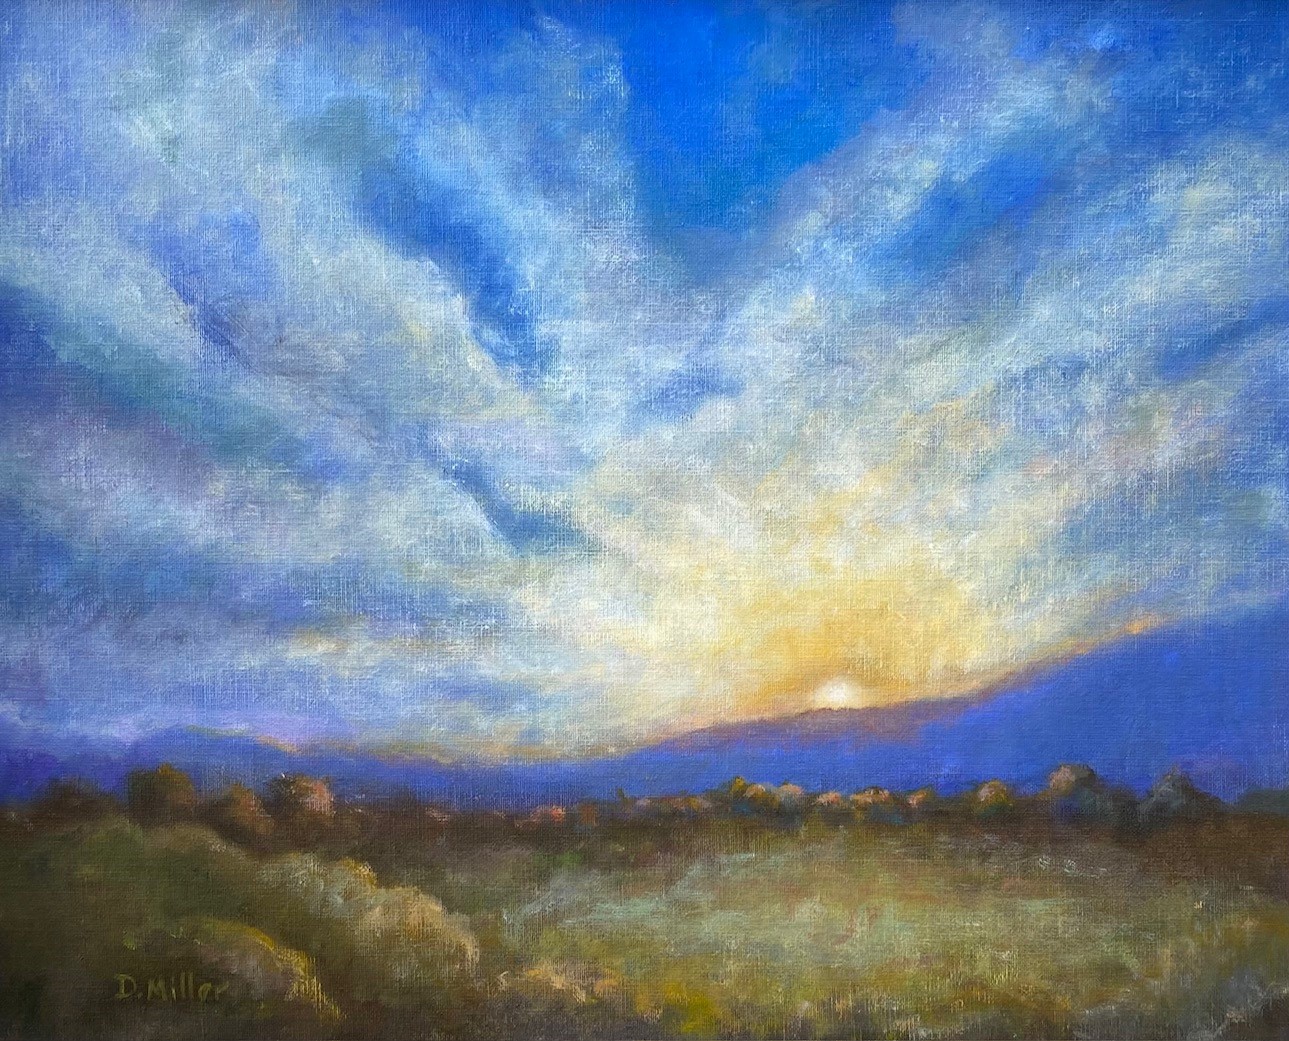 An oil painting titled "Golden Sunset" by Debbie Miller